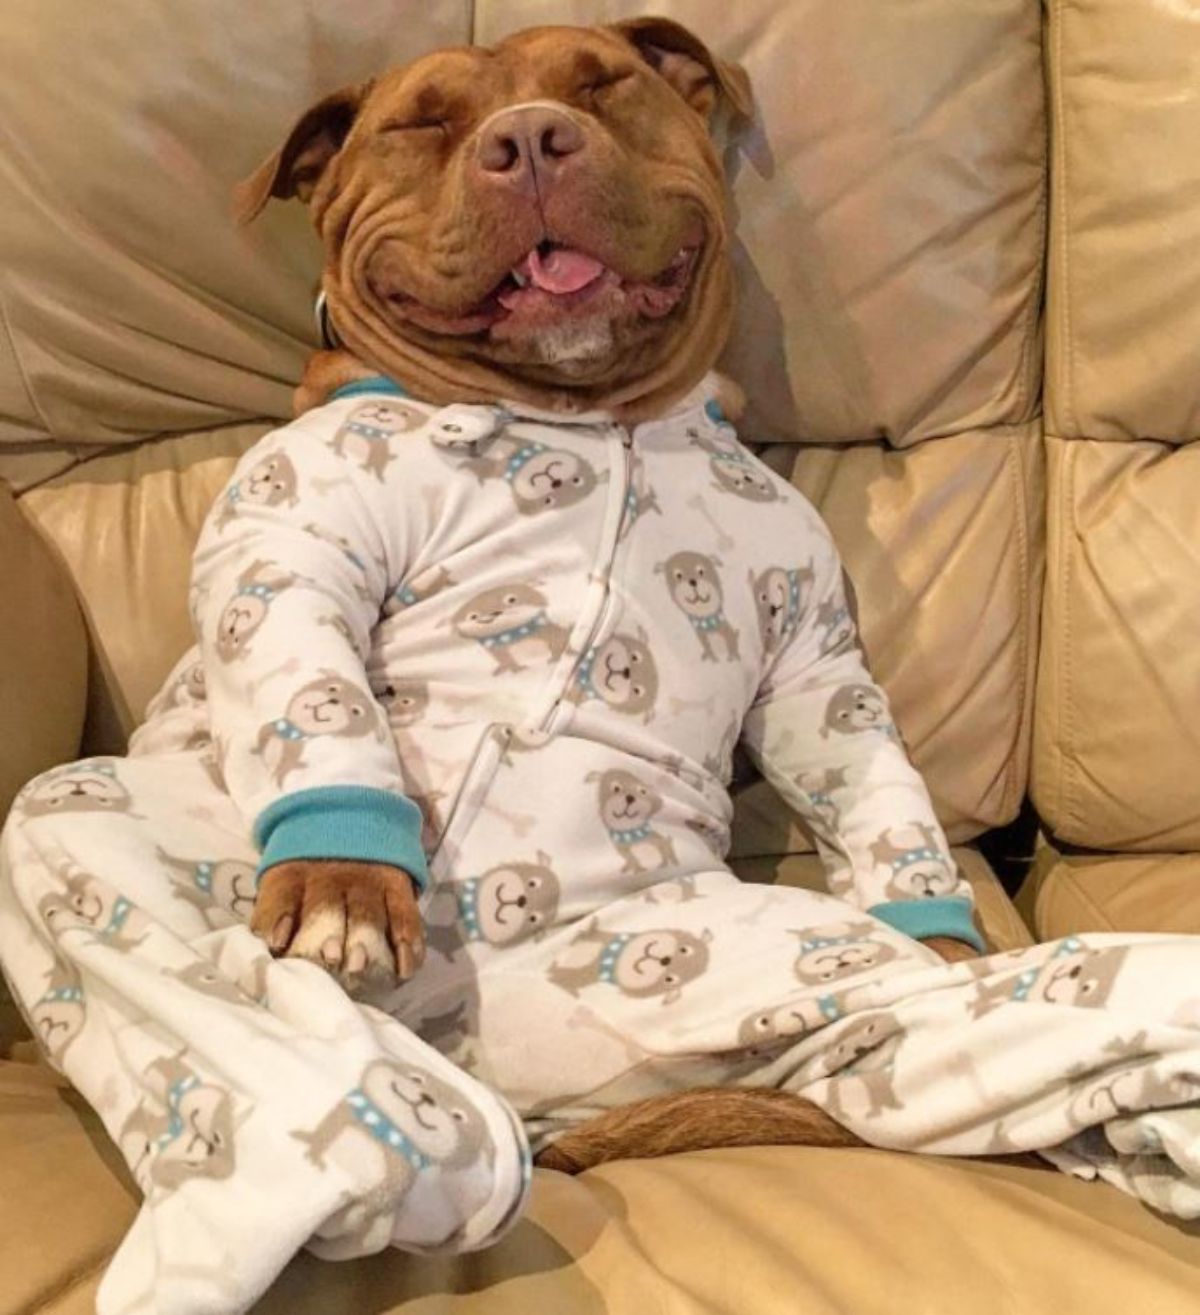 smiling brown and white pitbull sitting up on a brown sofa wearing a white and colourful onesie